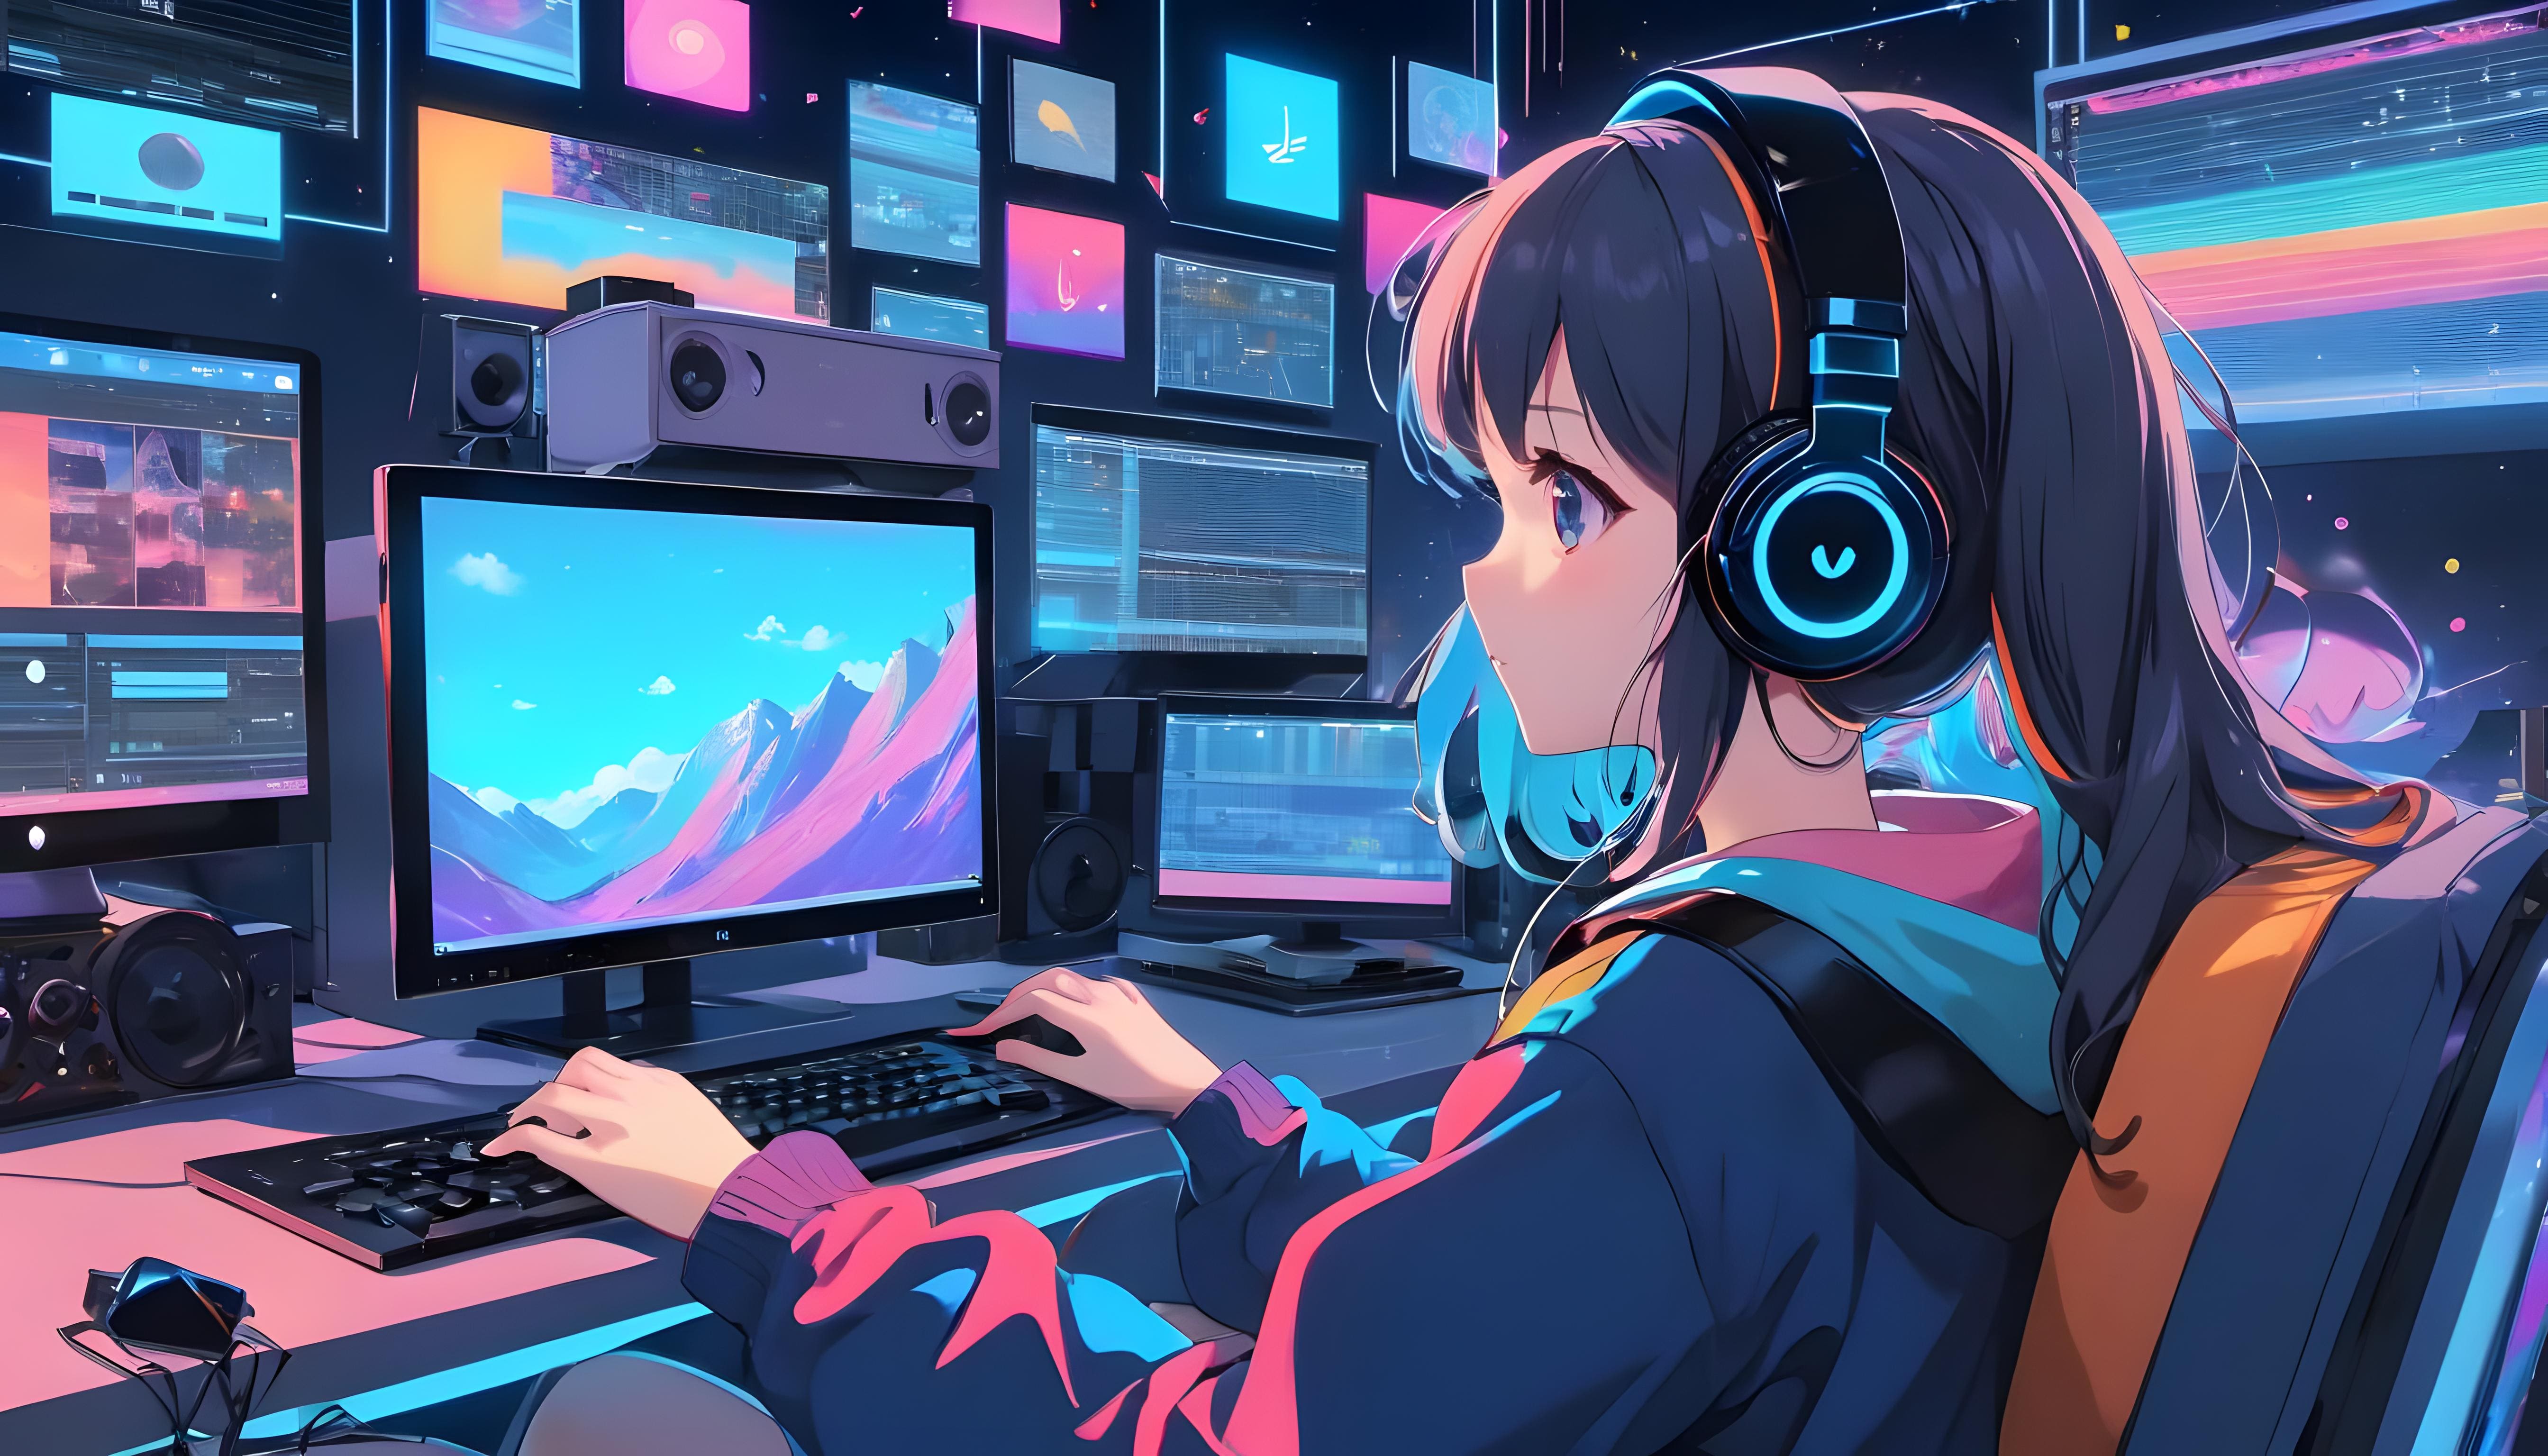 Girls gamers. ➖➖➖➖➖➖➖➖➖➖➖➖➖➖➖➖➖➖ ❤ Like if you enjoyed ❤ 💬 Comment your  thoughts 💬 📌 Tag your gamer friends 📌 ➡… | Gamers anime, Hd anime  wallpapers, Gamer girl